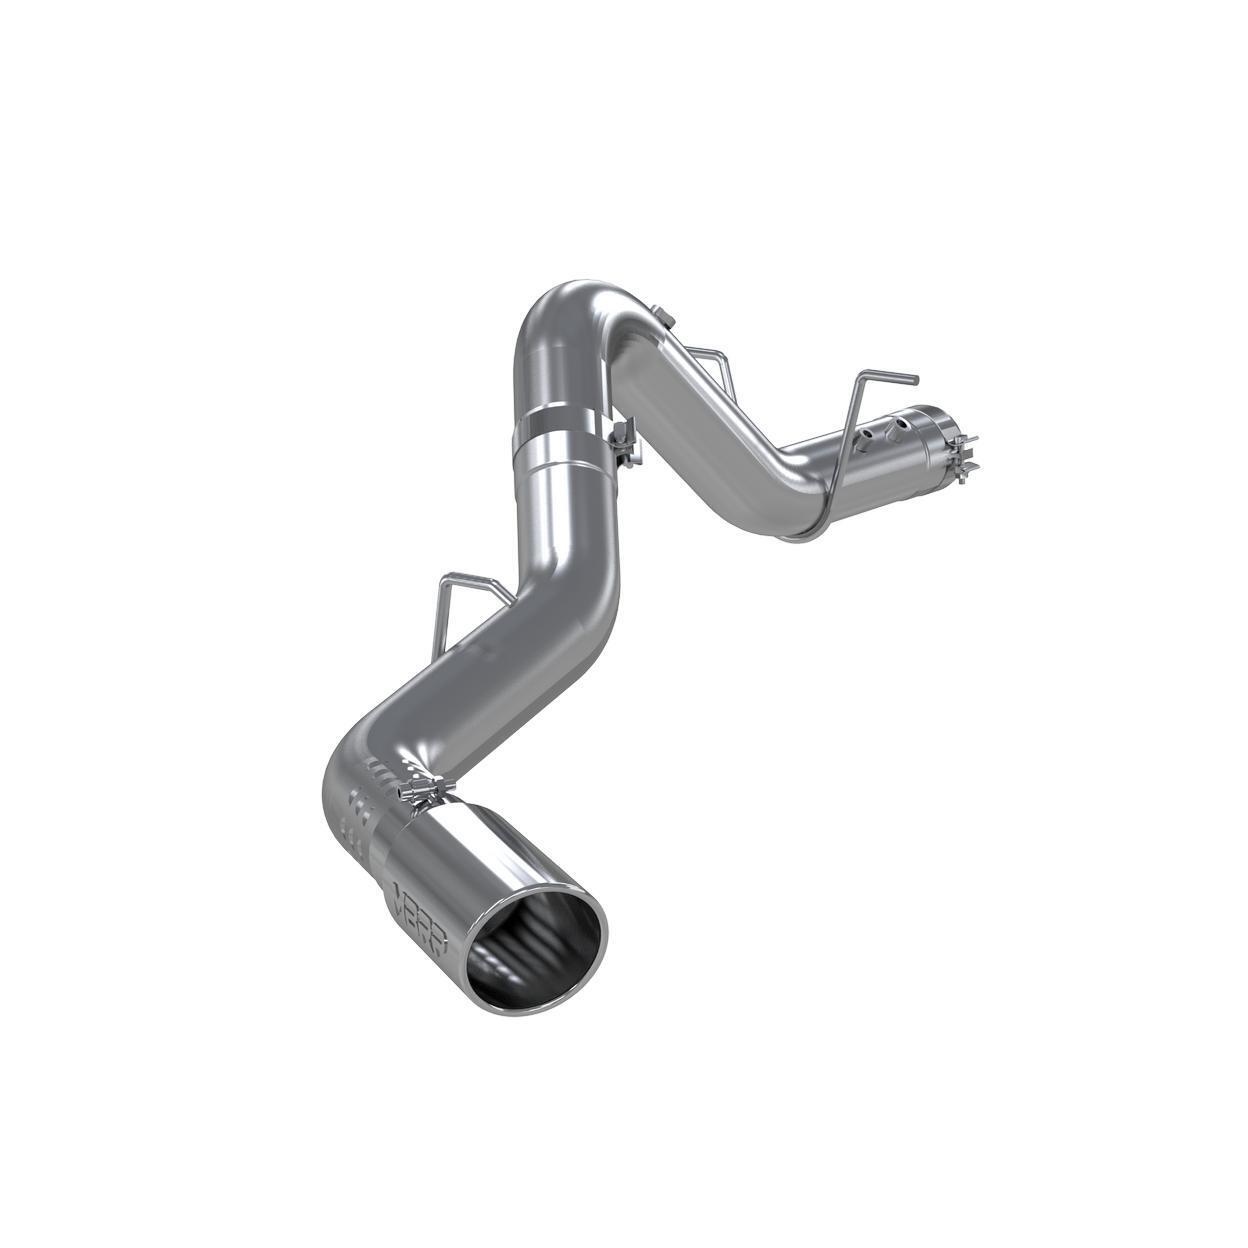 Exhaust System Kit for 2020 GMC Sierra 2500 HD